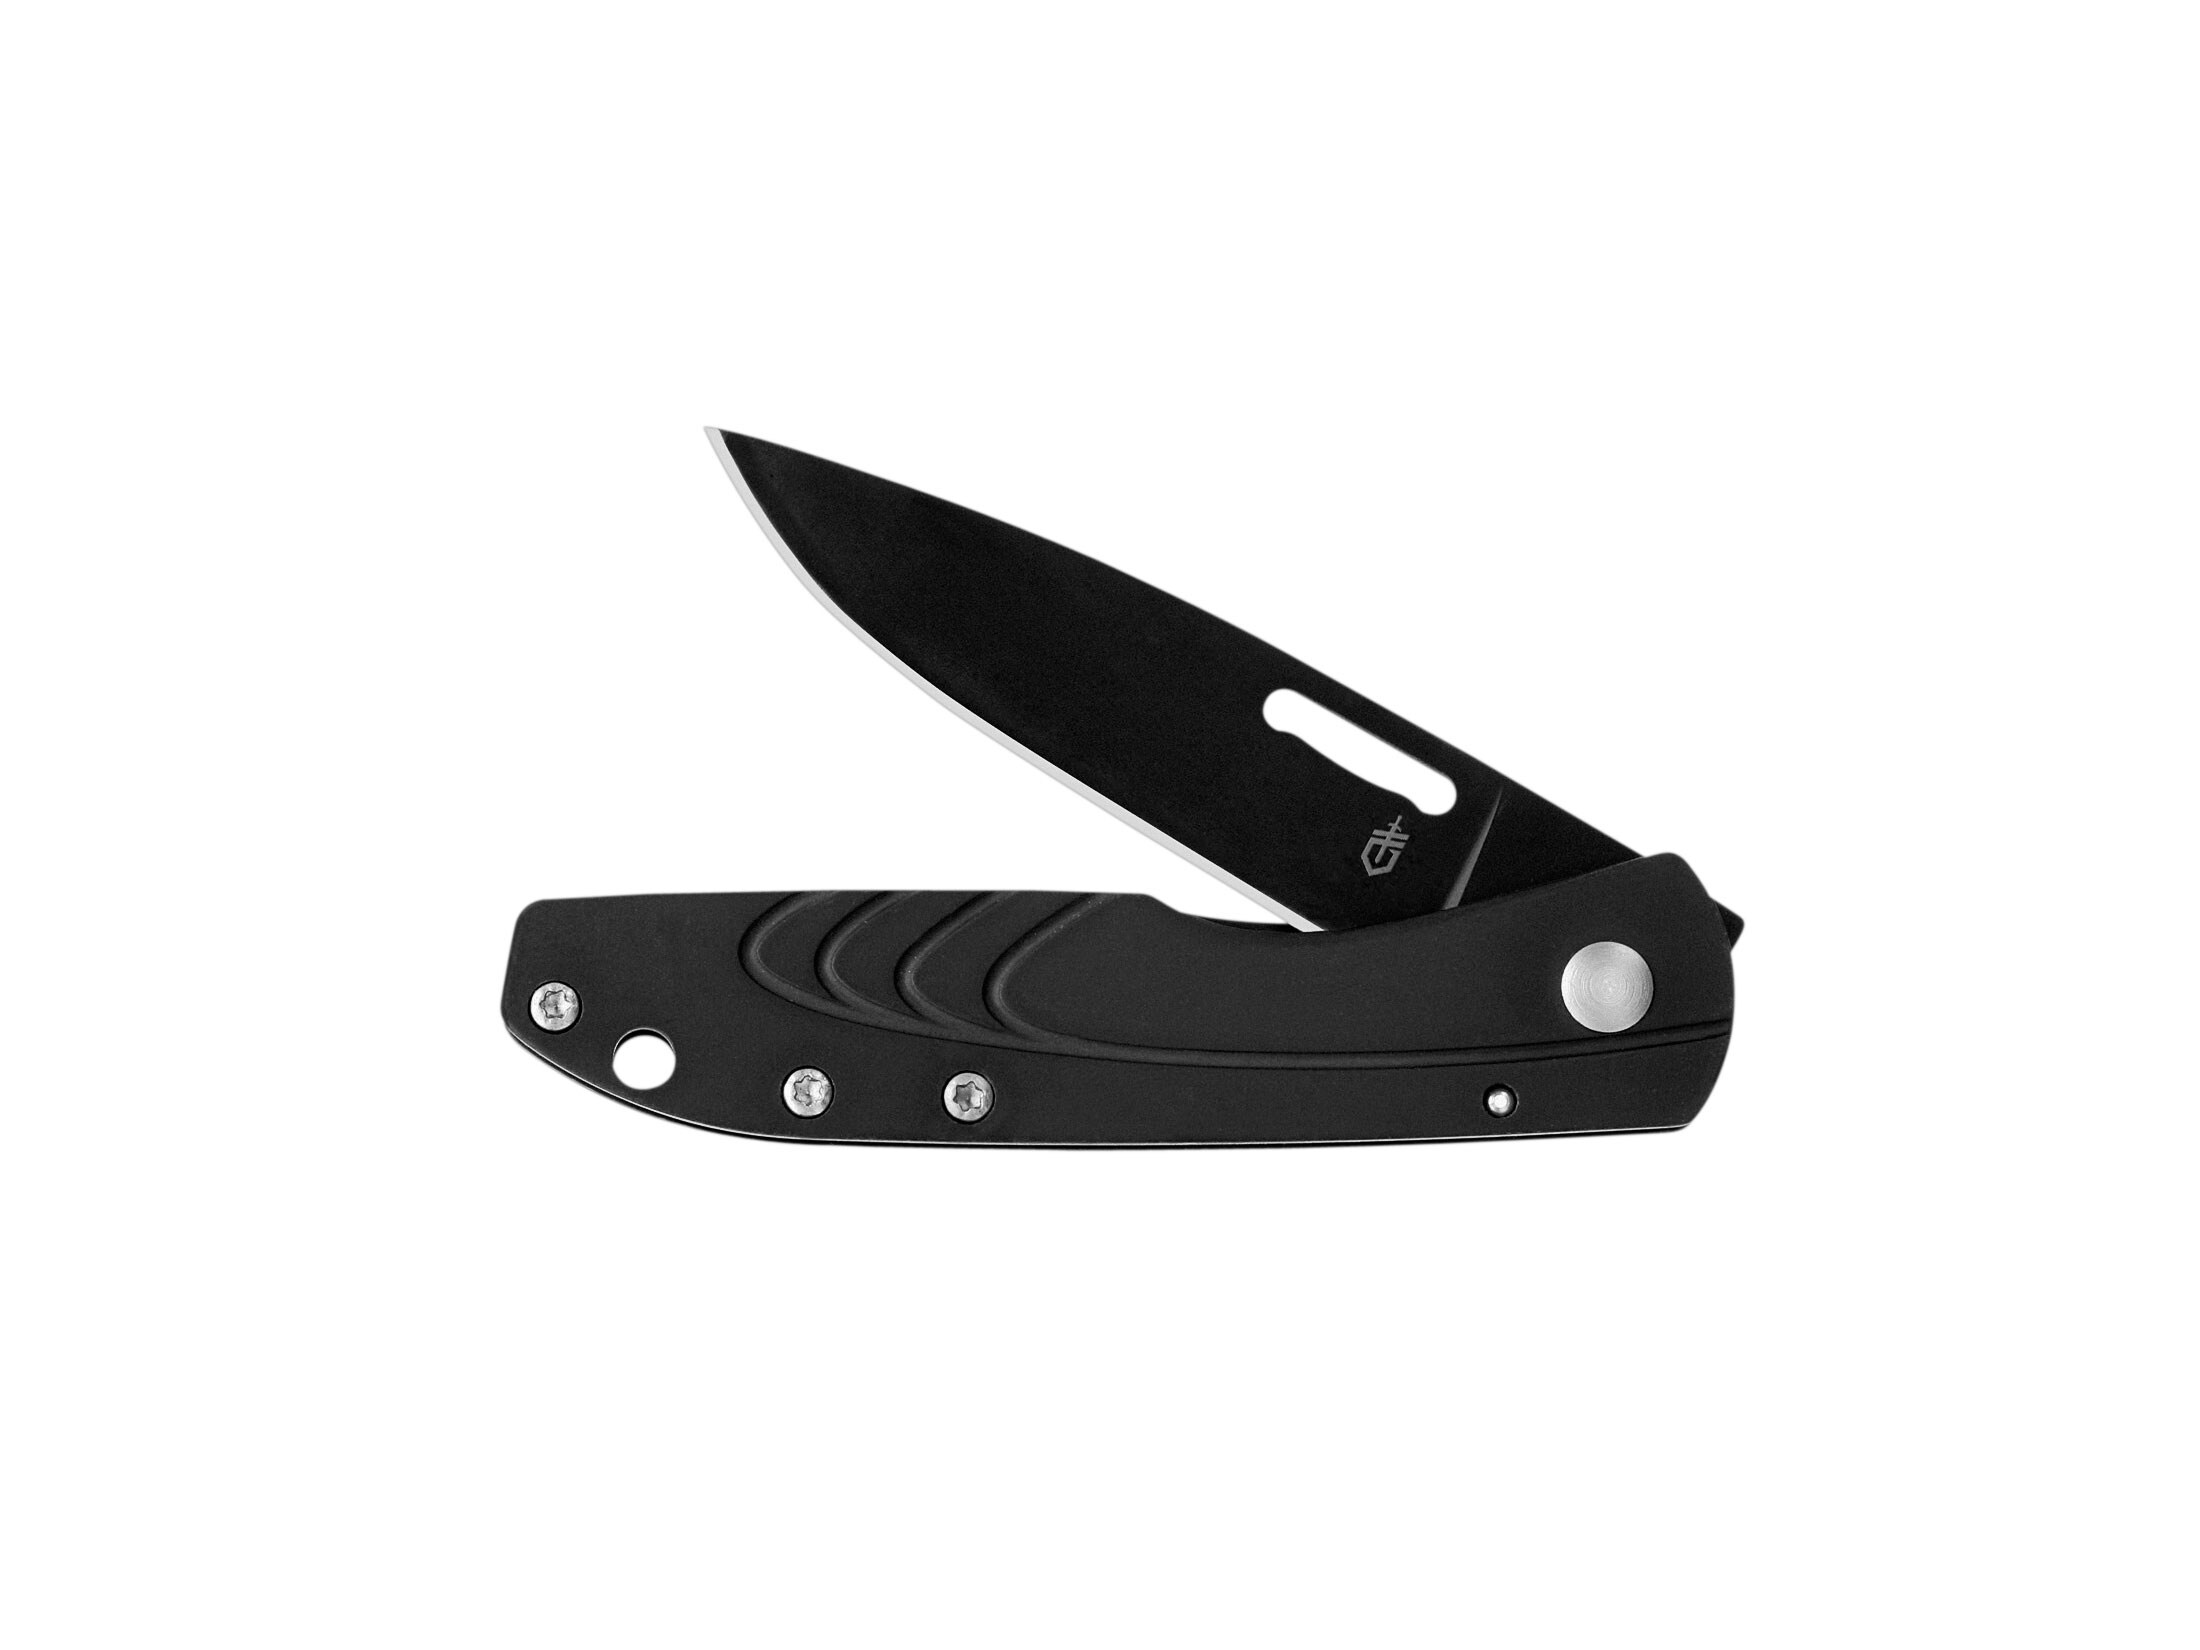 Gerber STL 2.0 Folding Knife 2″ Drop Point 440A Black Stainless Steel Blade and Handle For Sale